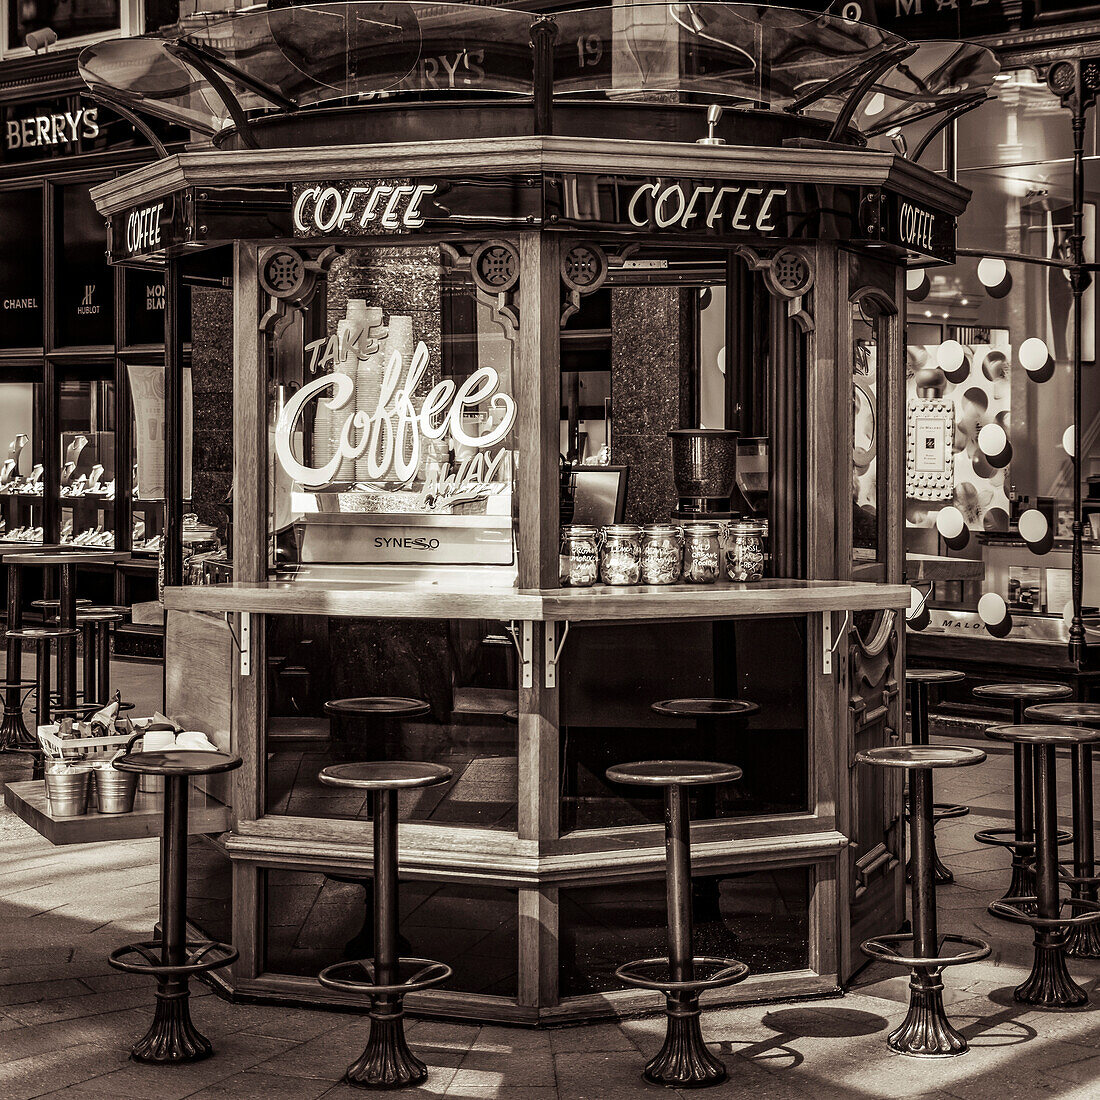 Coffee stall in a shopping mall; Leeds, West Yorkshire, England